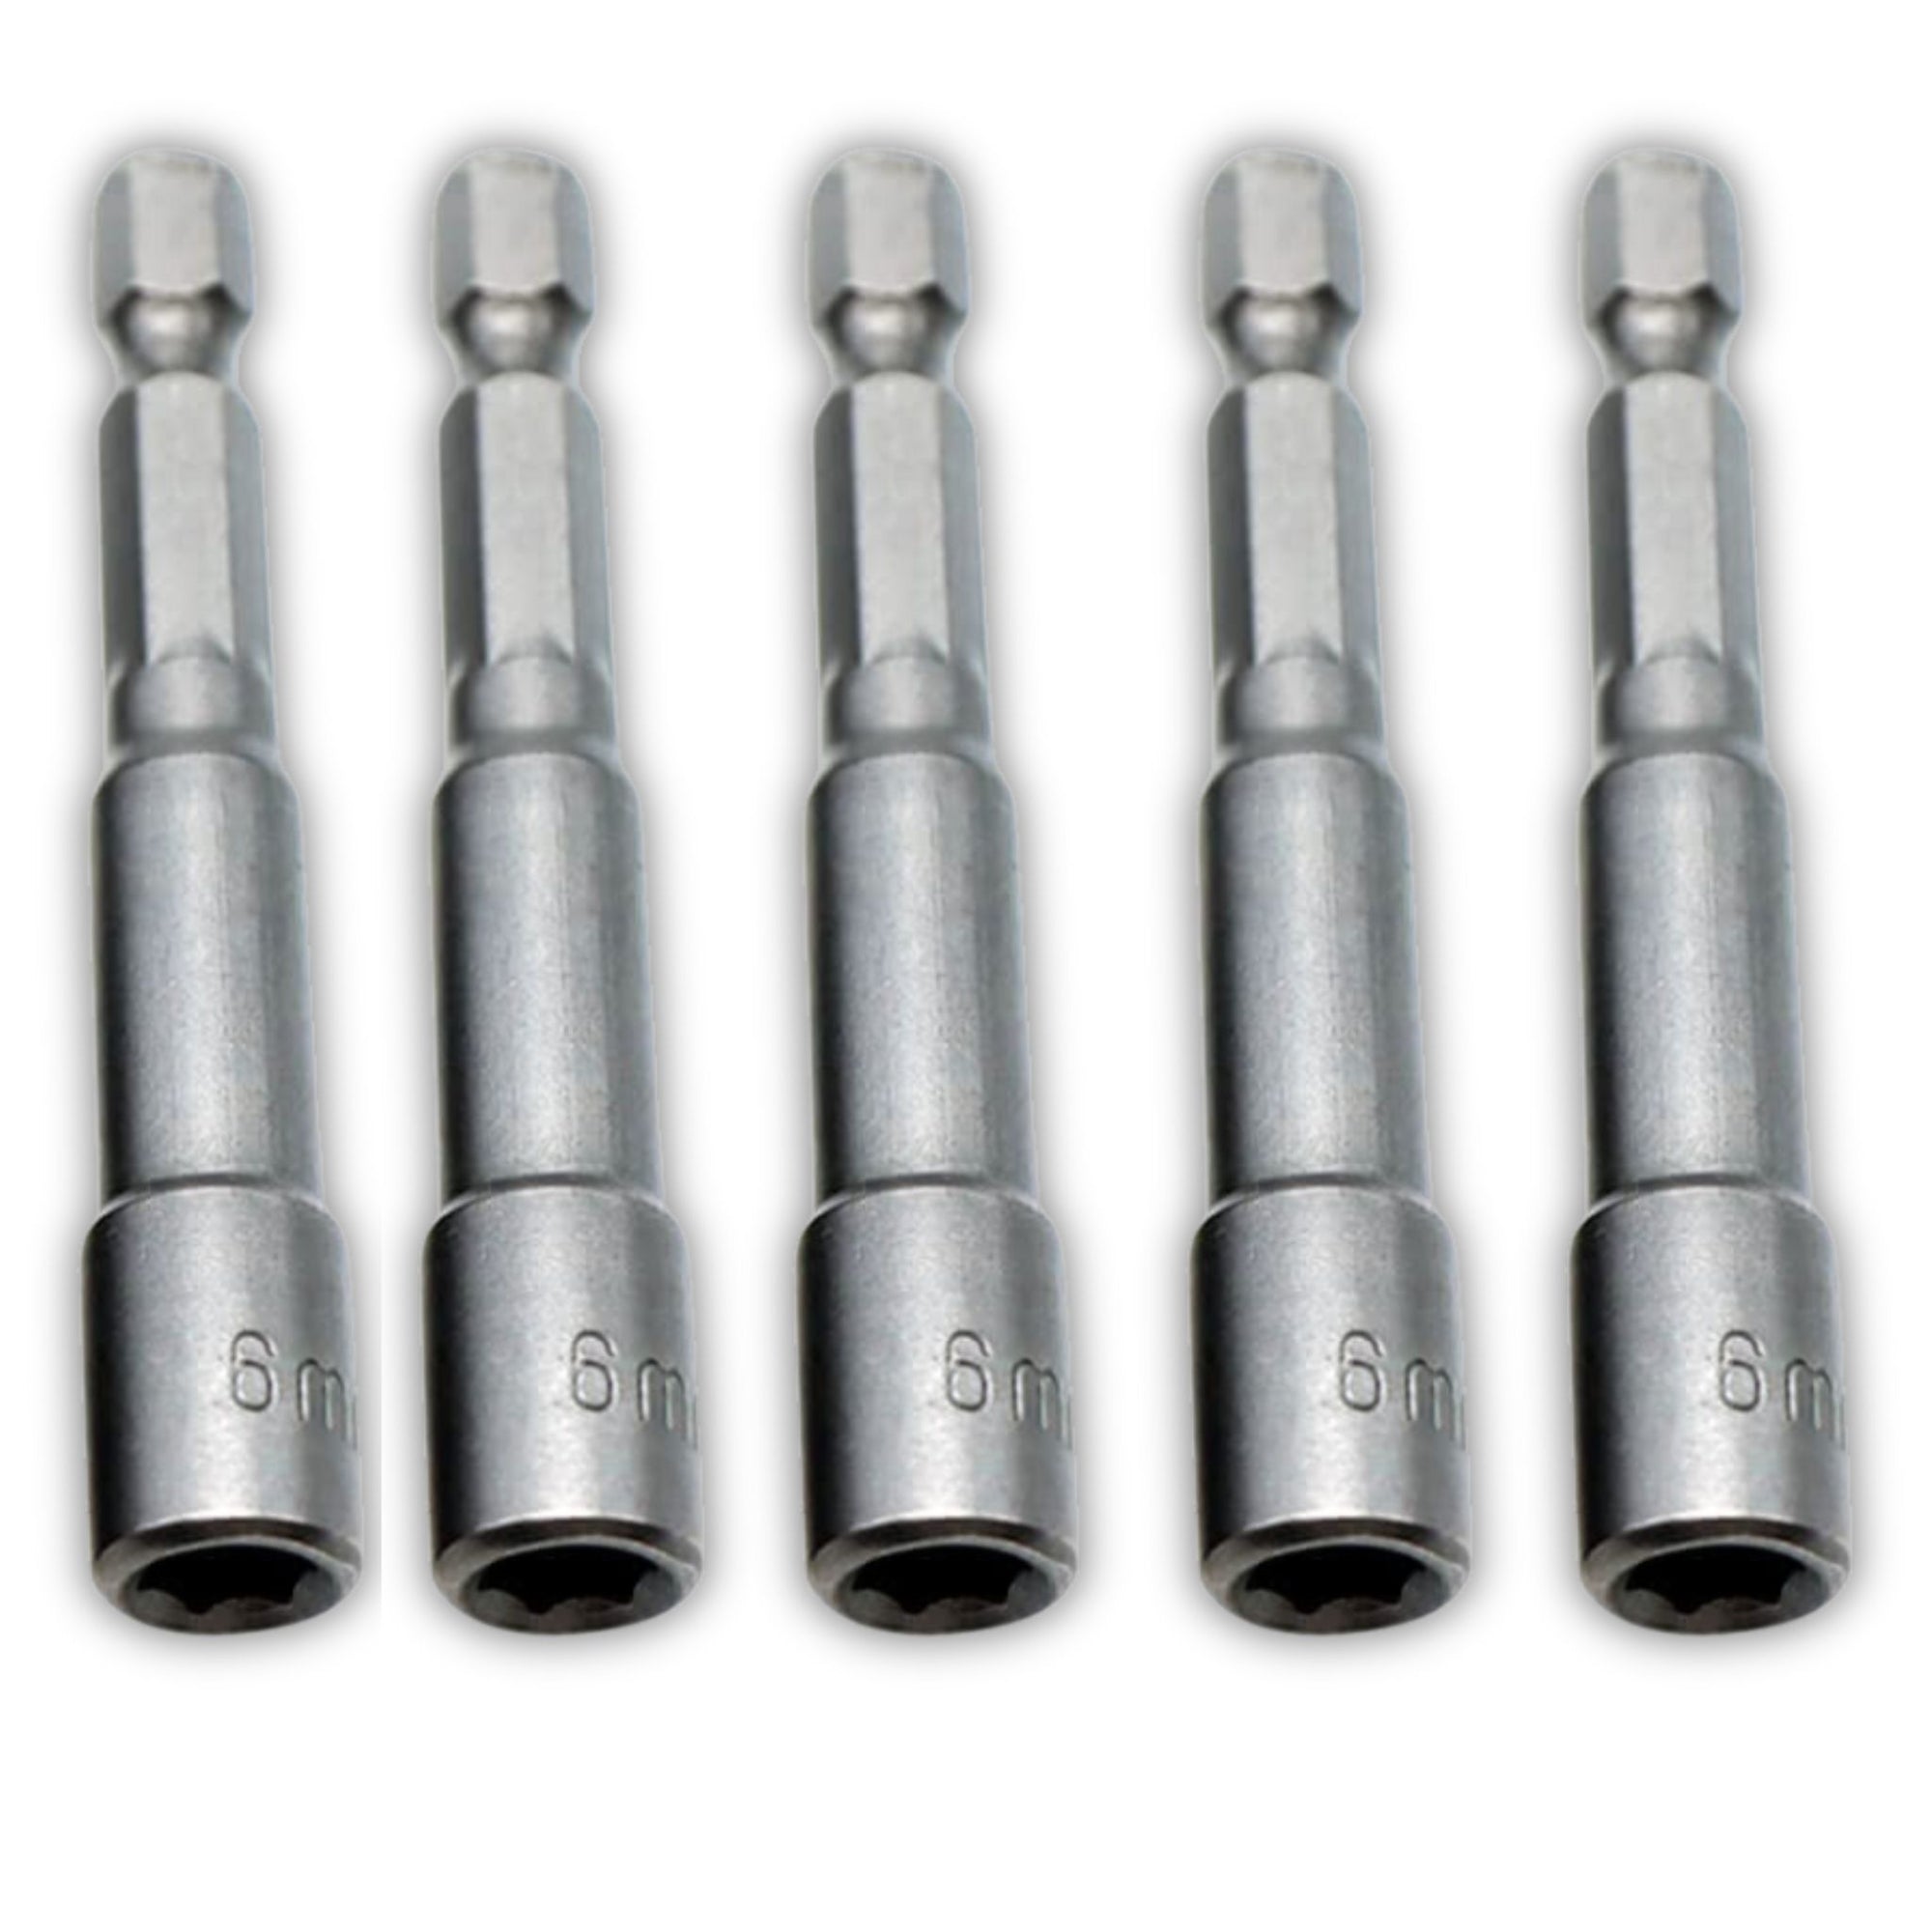 5 Pack - Magnetic Tip Power Nut Driver Bit Set Setters 1/4" Hex Shank 6mm - South East Clearance Centre